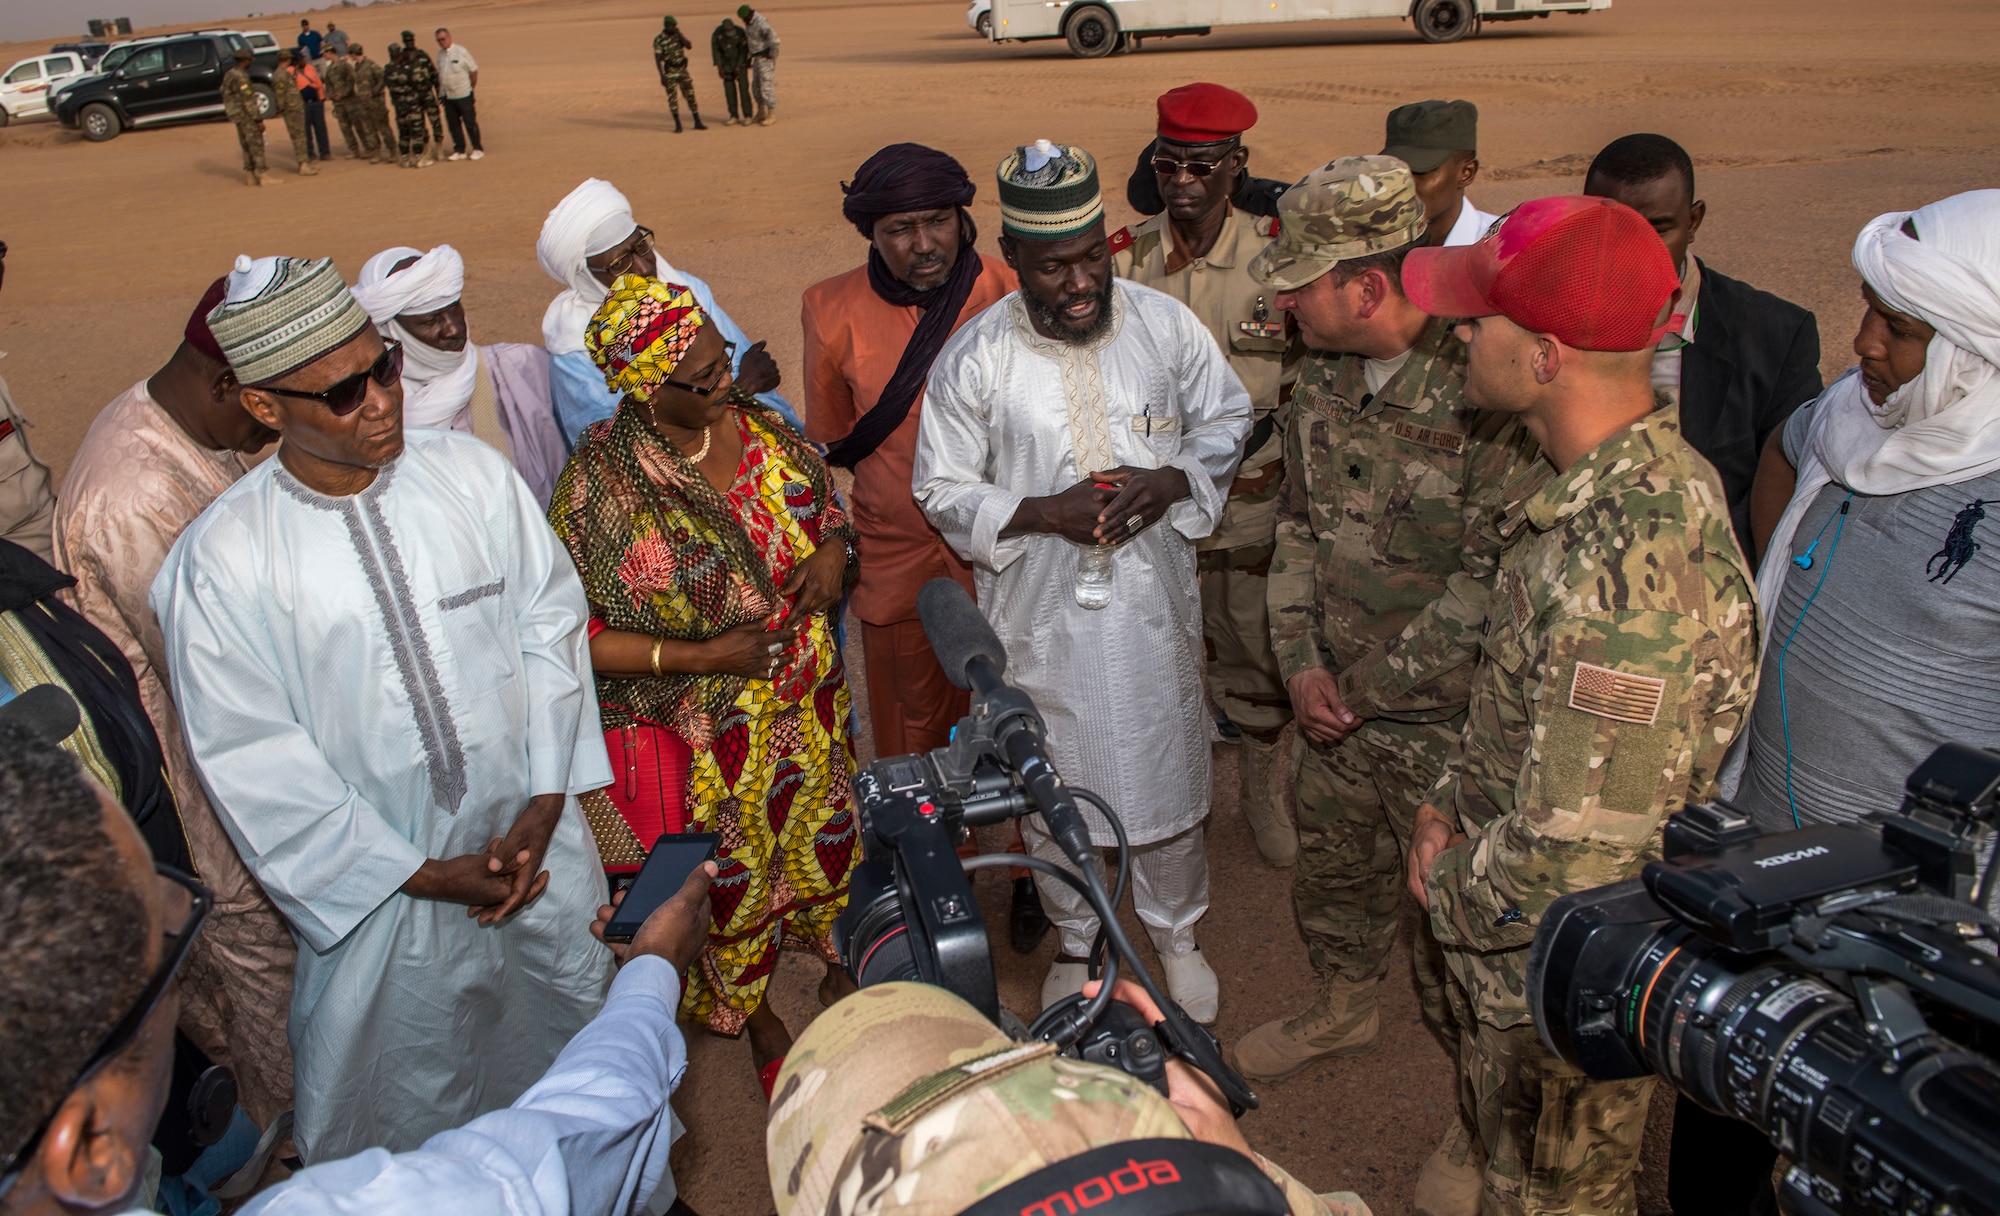 Agadez civic leaders answer questions from the local media with commanders of the Forces Armées Nigeriennes and U.S. Air Force squadron commanders from the 409th Air Expeditionary Group Feb. 21, 2018, at Nigerien Air Base 201, Niger.  The purpose of the media visit was to showcase the interoperability and joint partnership between the U.S. Air Force and Niger. (U.S. Air Force photo by Tech. Sgt. Nick Wilson)